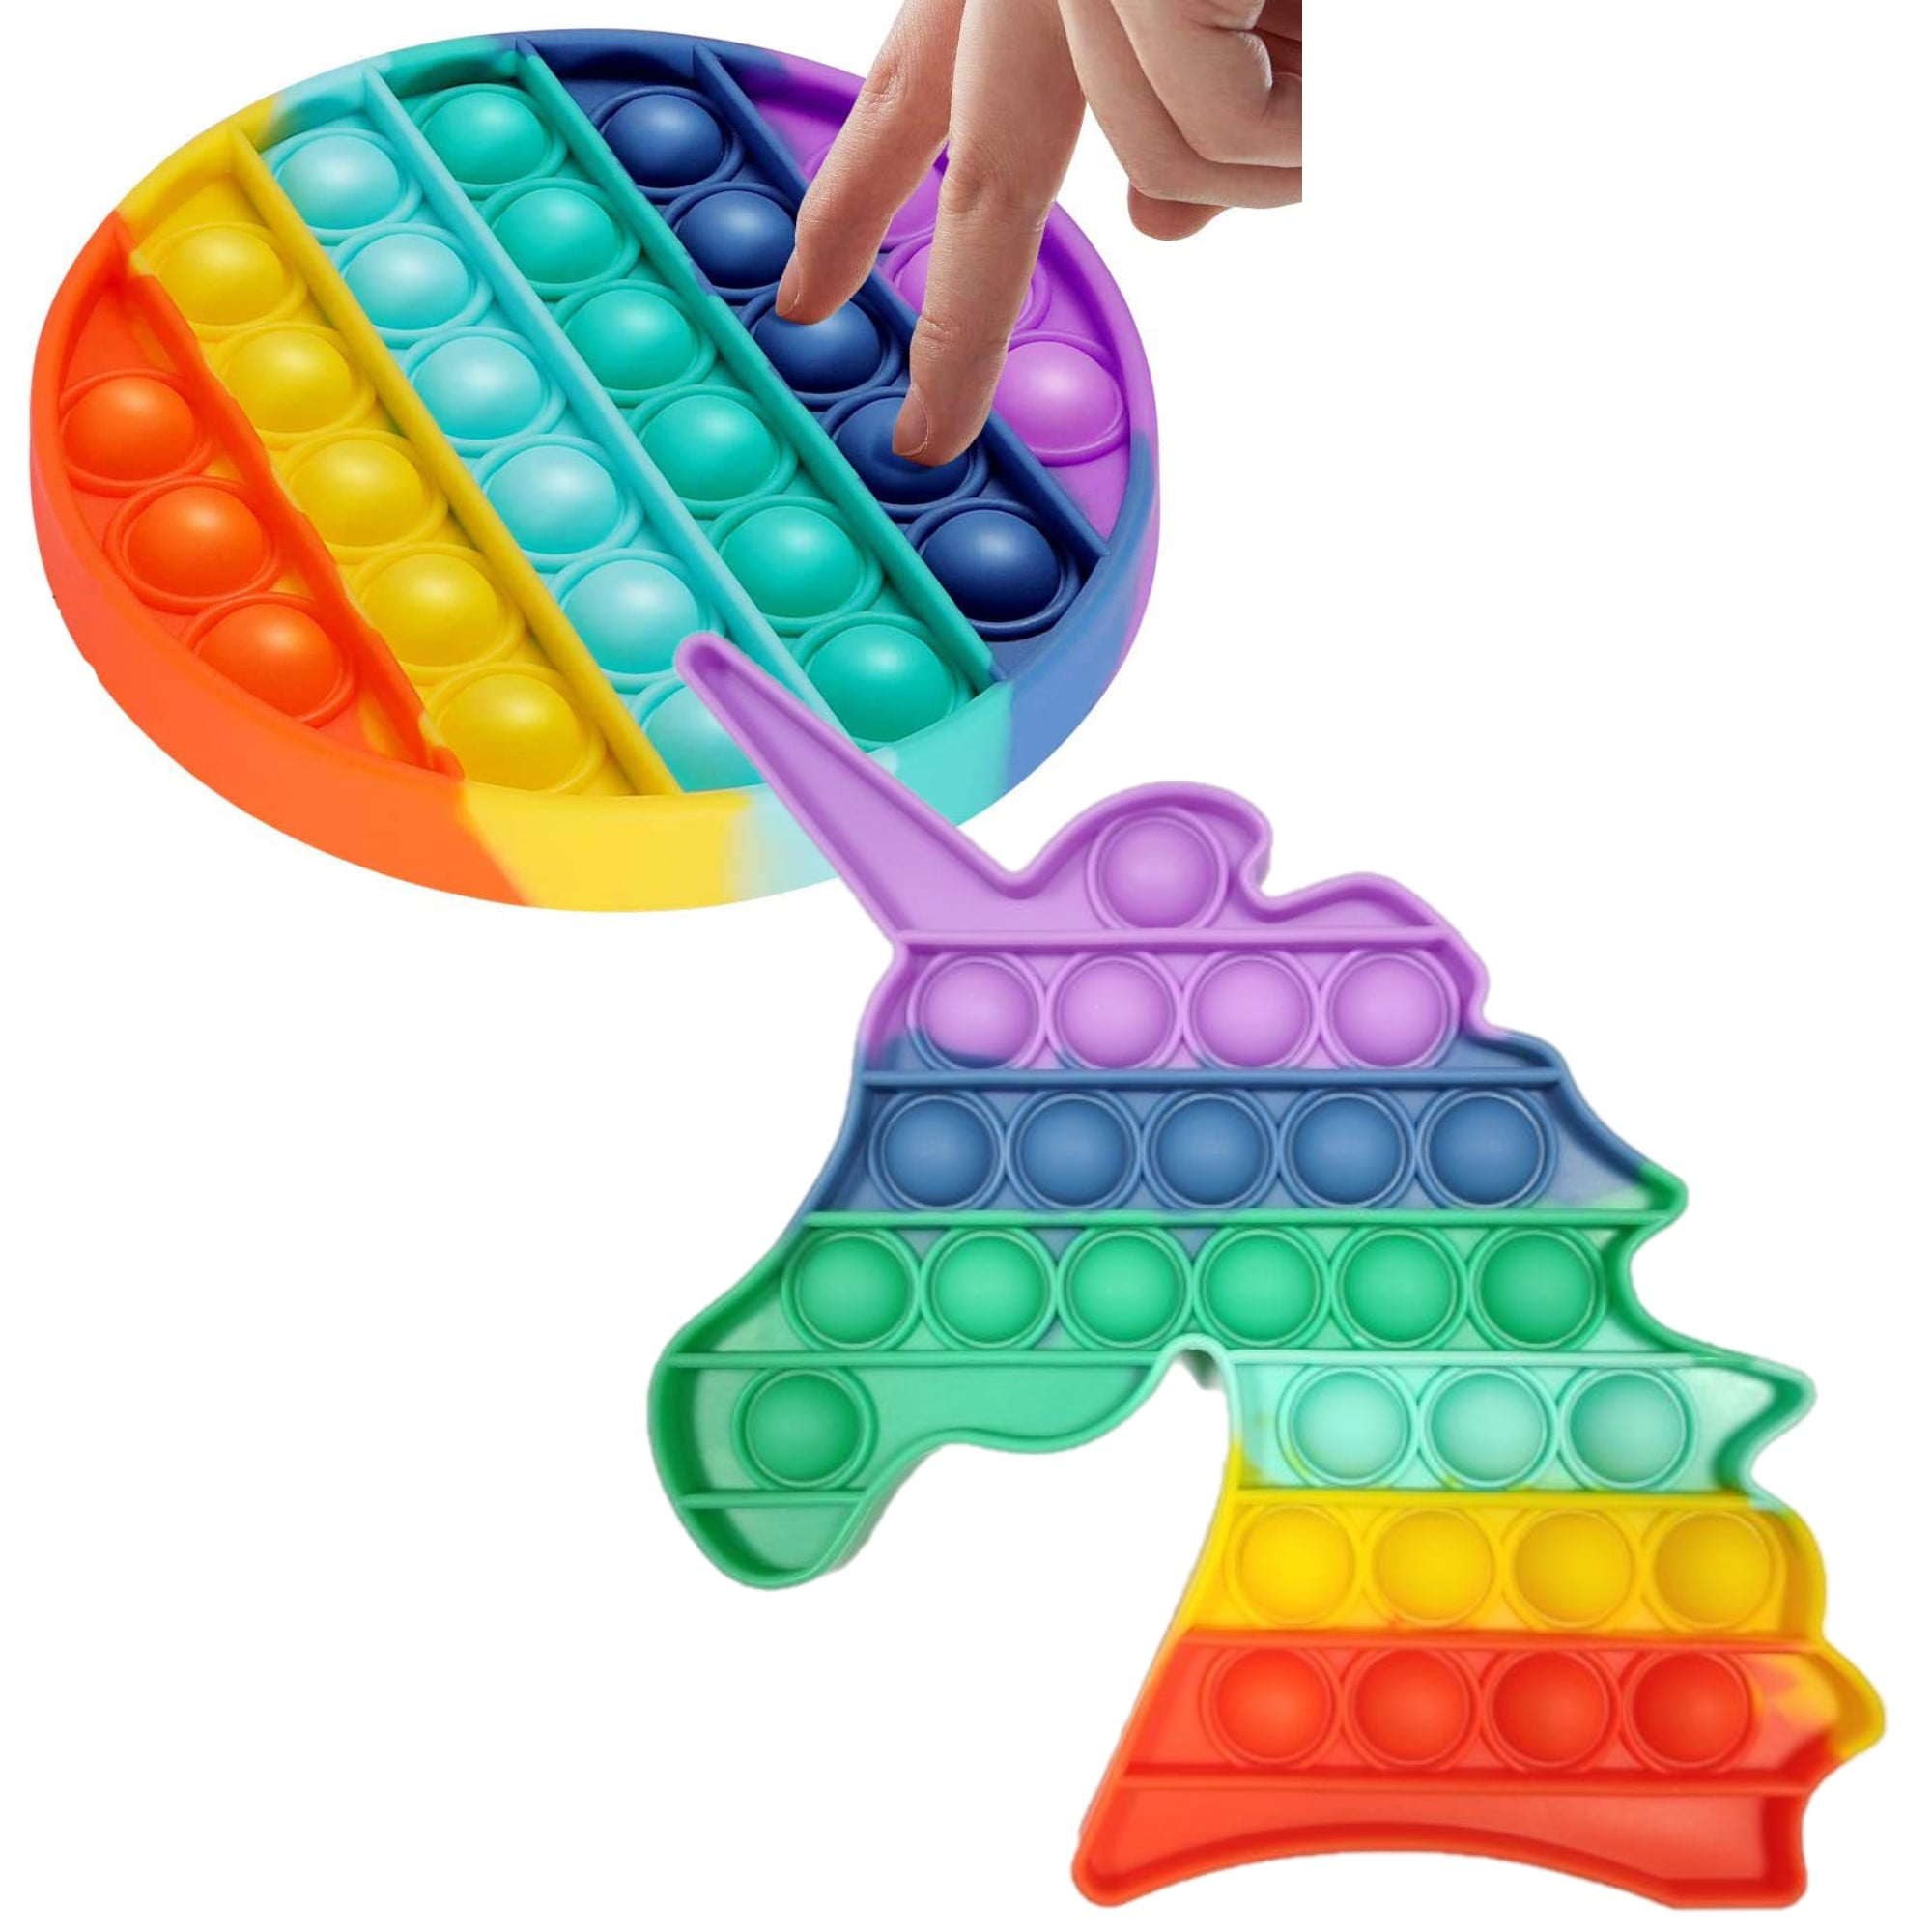 Mouse Push Pop Bubble Sensory Fidget Toy Stress Anxiety Relief Popper Toys for Autism ADHD Special Needs Rainbow Multicolor 4 Pack Set: Unicorn Robot Dinosaur Silicone Squeeze It Fidgets